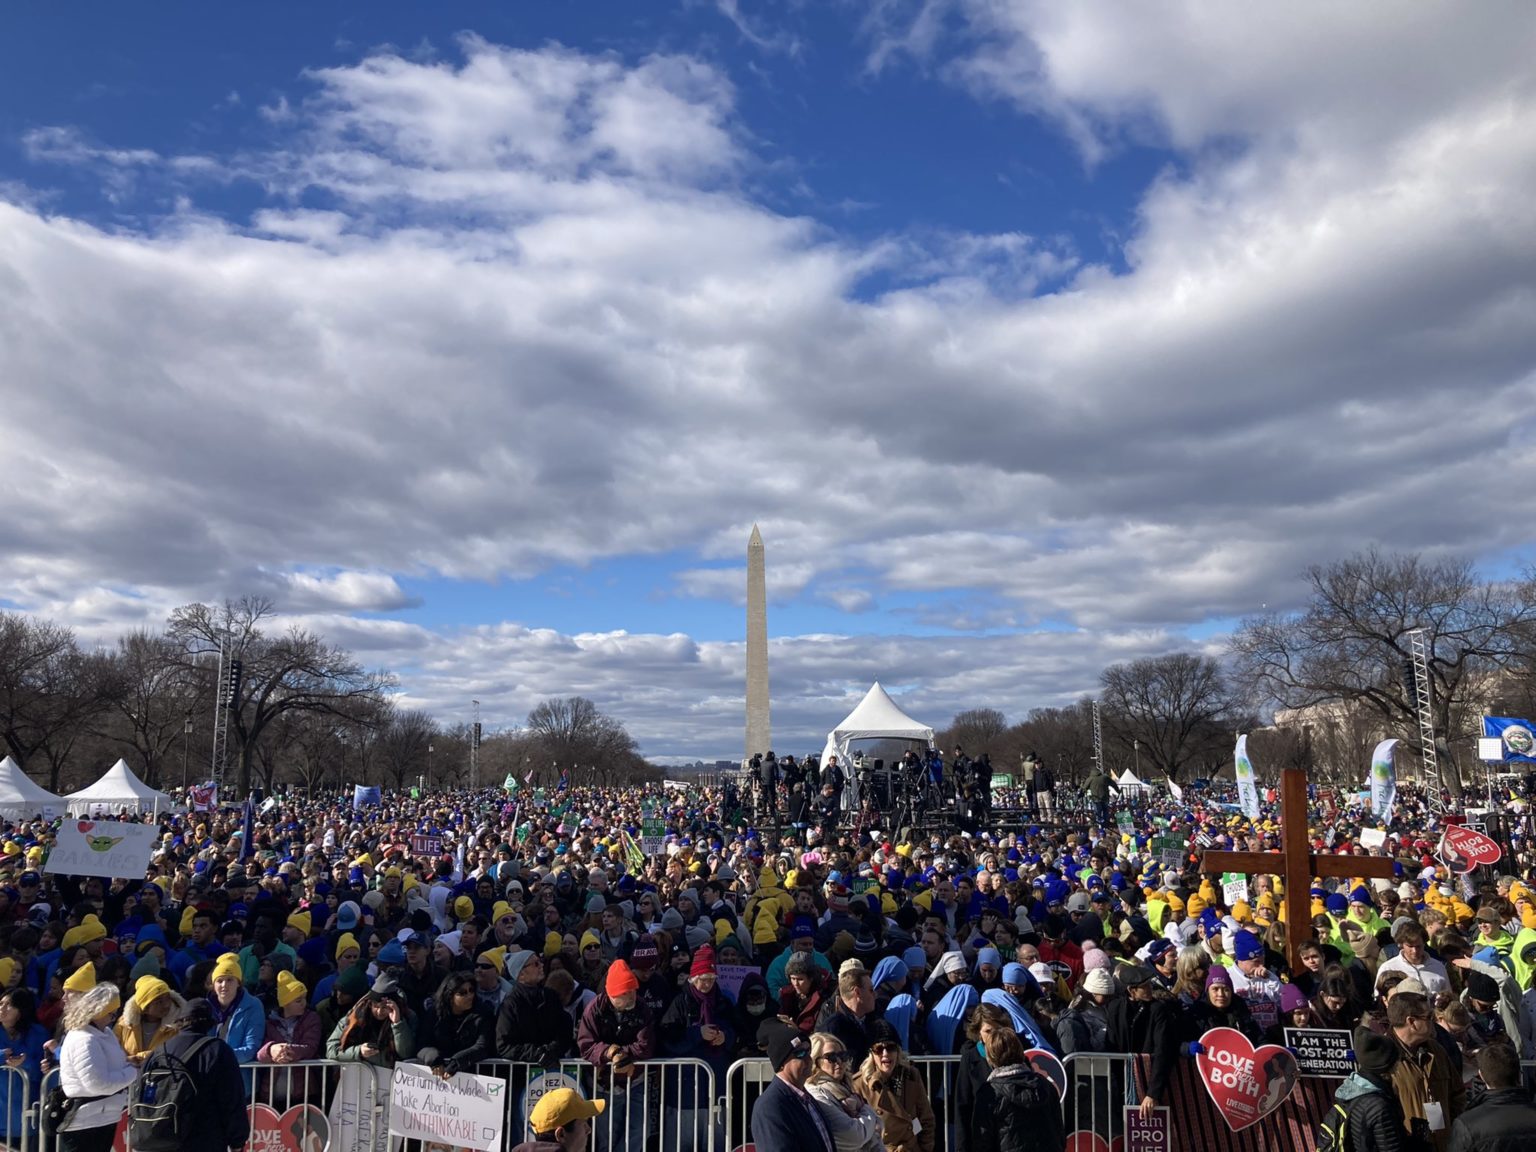 100,000 ProLife Americans March for Life, Celebrate Supreme Court